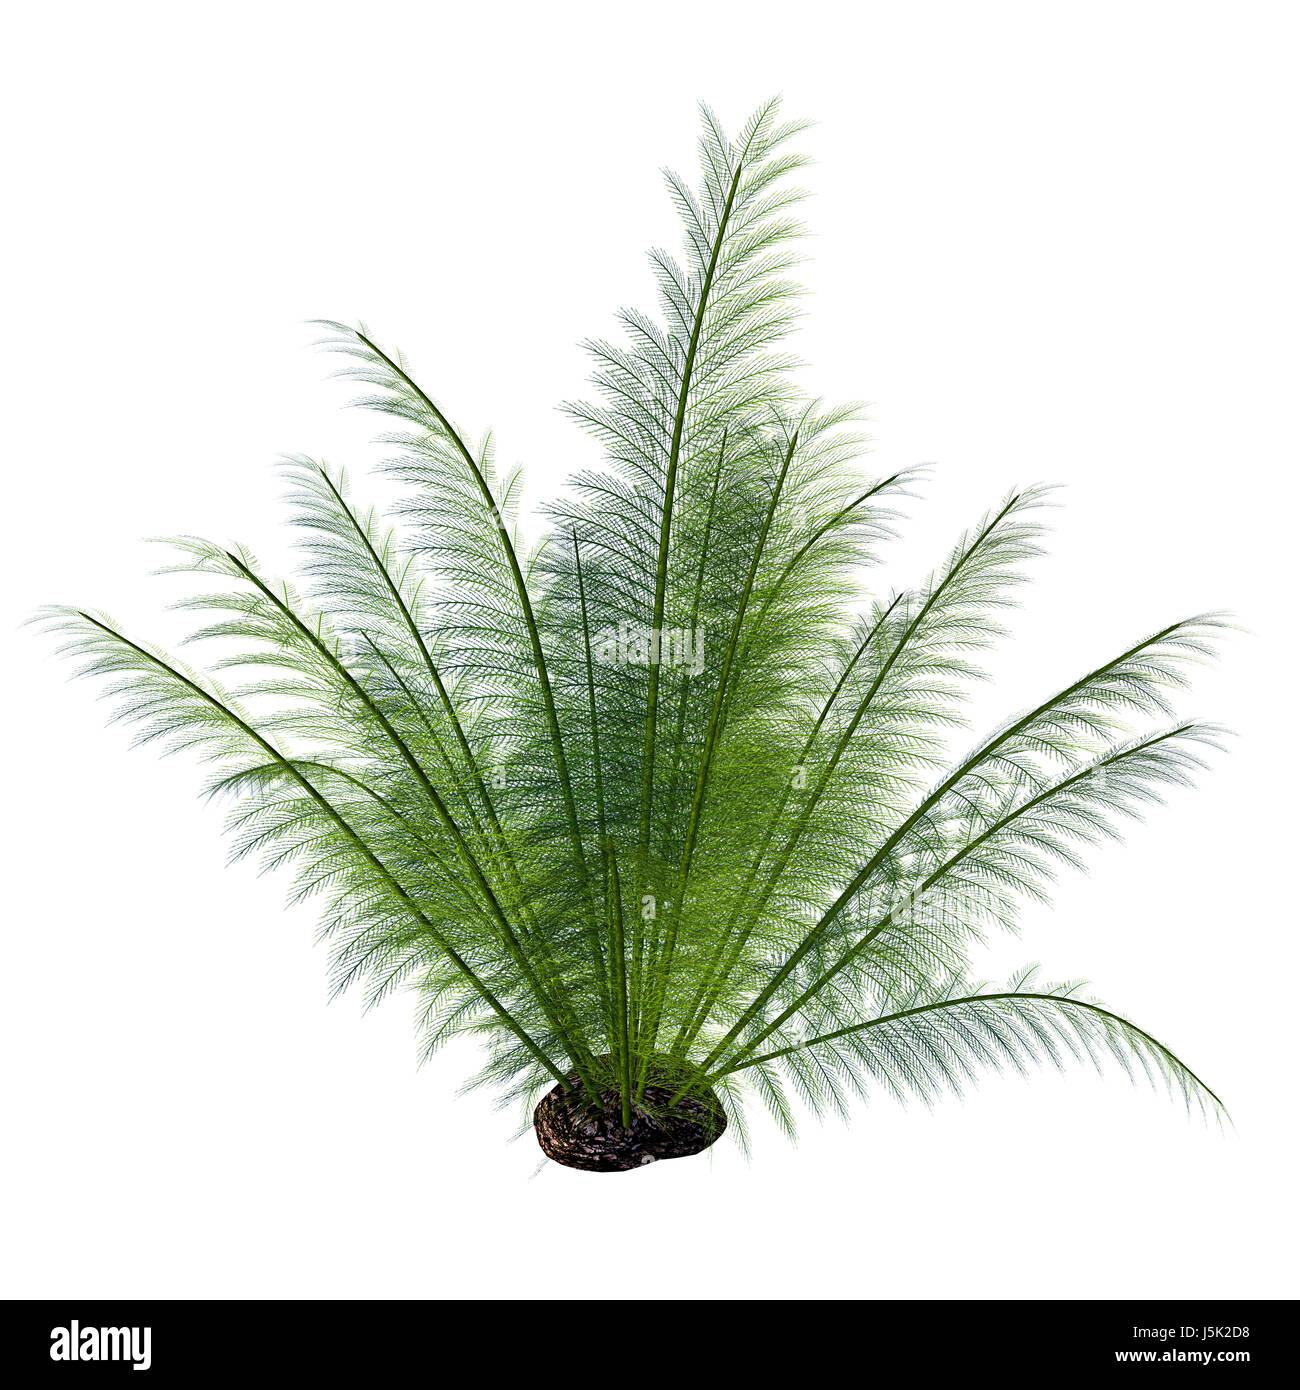 Onychiopsis Seed Plant - Onychiopsis was a Cretaceous fern with feathery fronds and lived on forest edges, lake and river borders and humid plains. Stock Photo